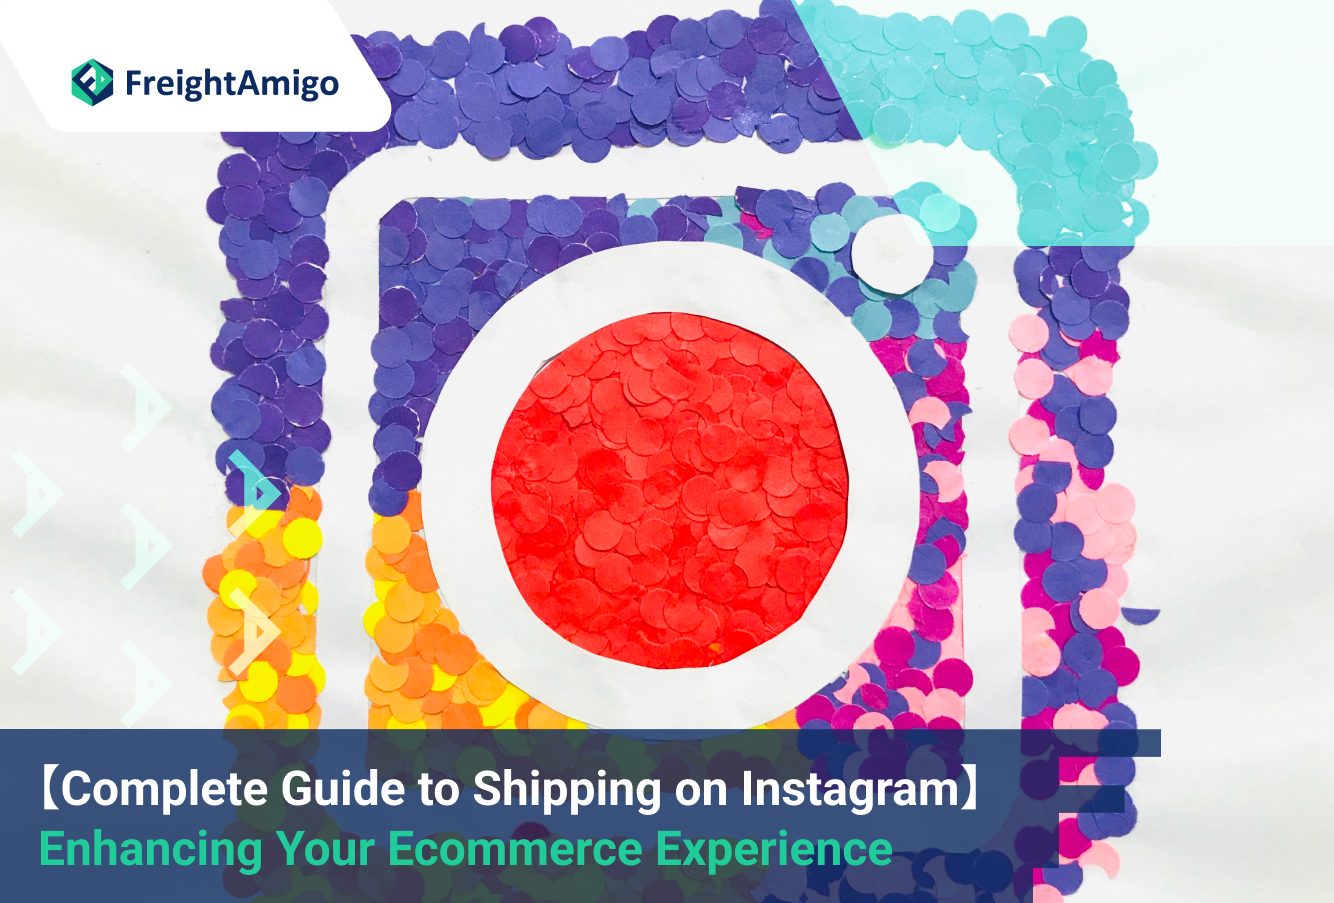 Complete Guide to Shipping on Instagram: Enhancing Your Ecommerce Experience